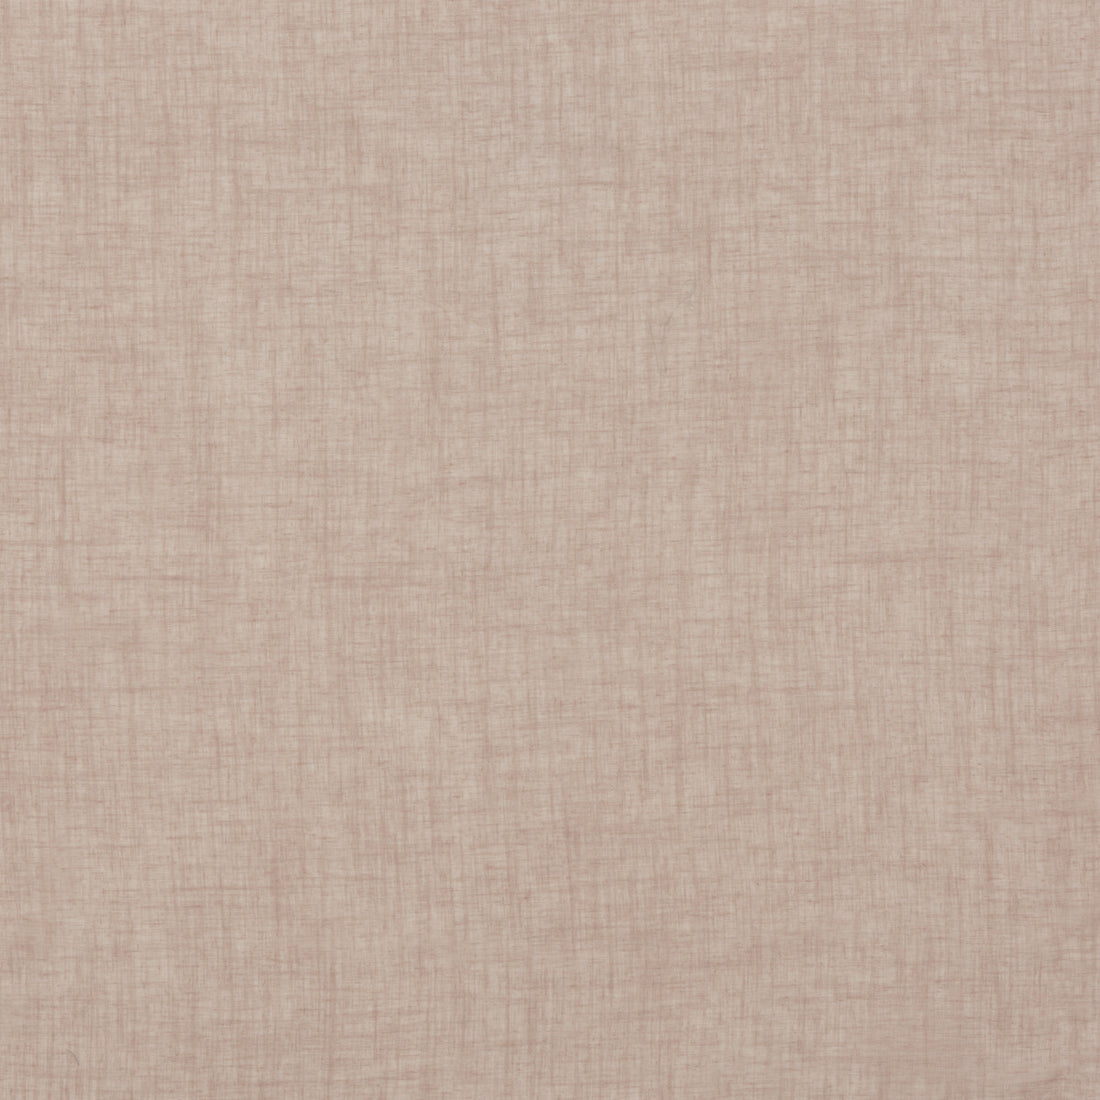 Kelso fabric in blush color - pattern PV1005.440.0 - by Baker Lifestyle in the Notebooks collection